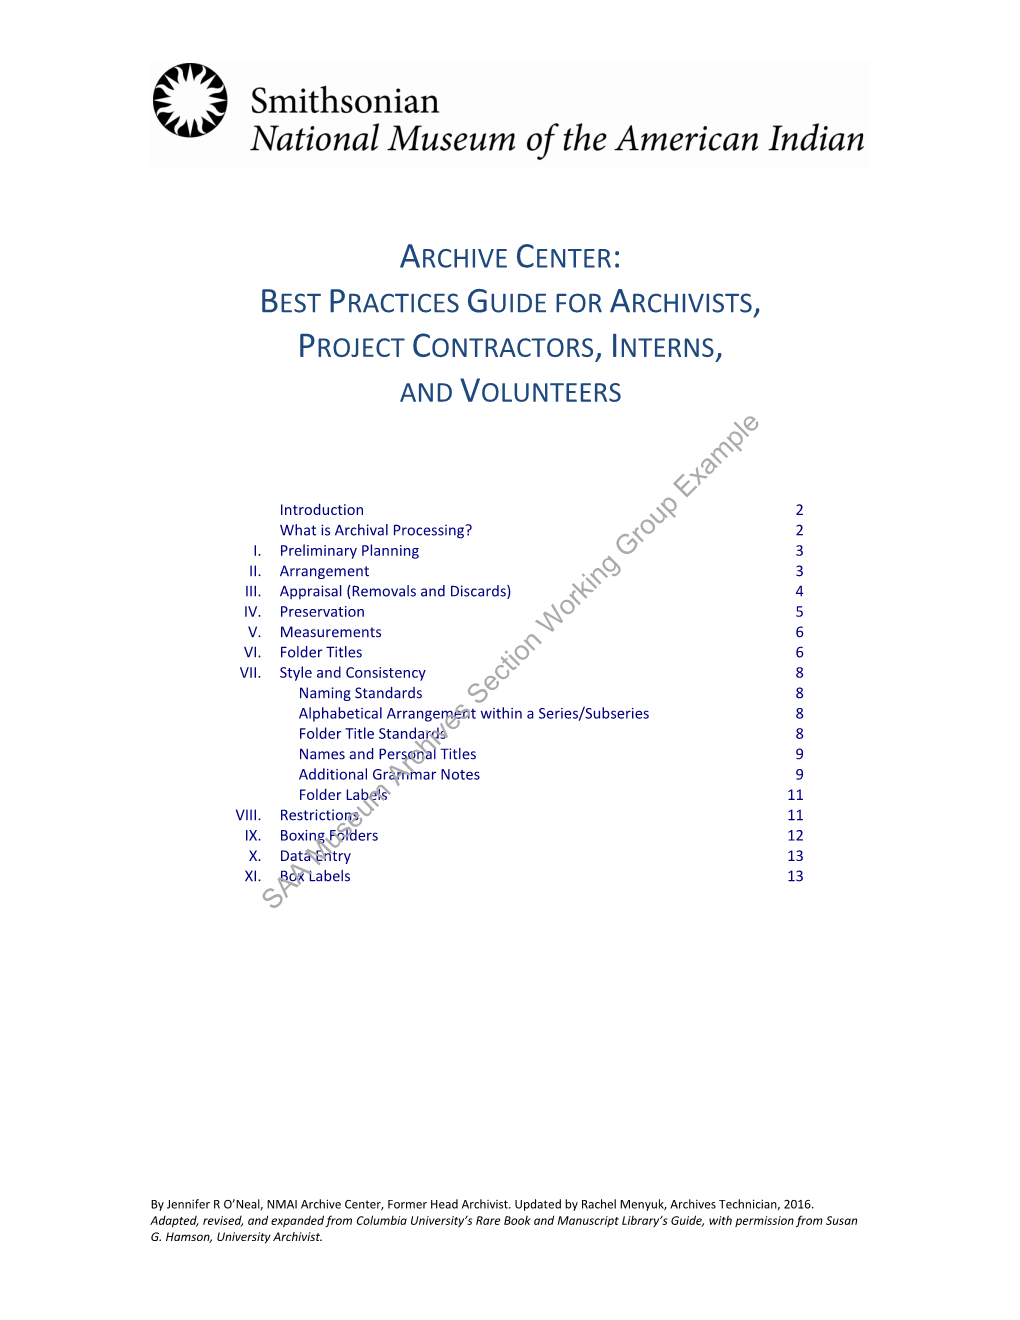 Archive Center: Best Practices Guide for Archivists, Project Contractors, Interns, and Volunteers